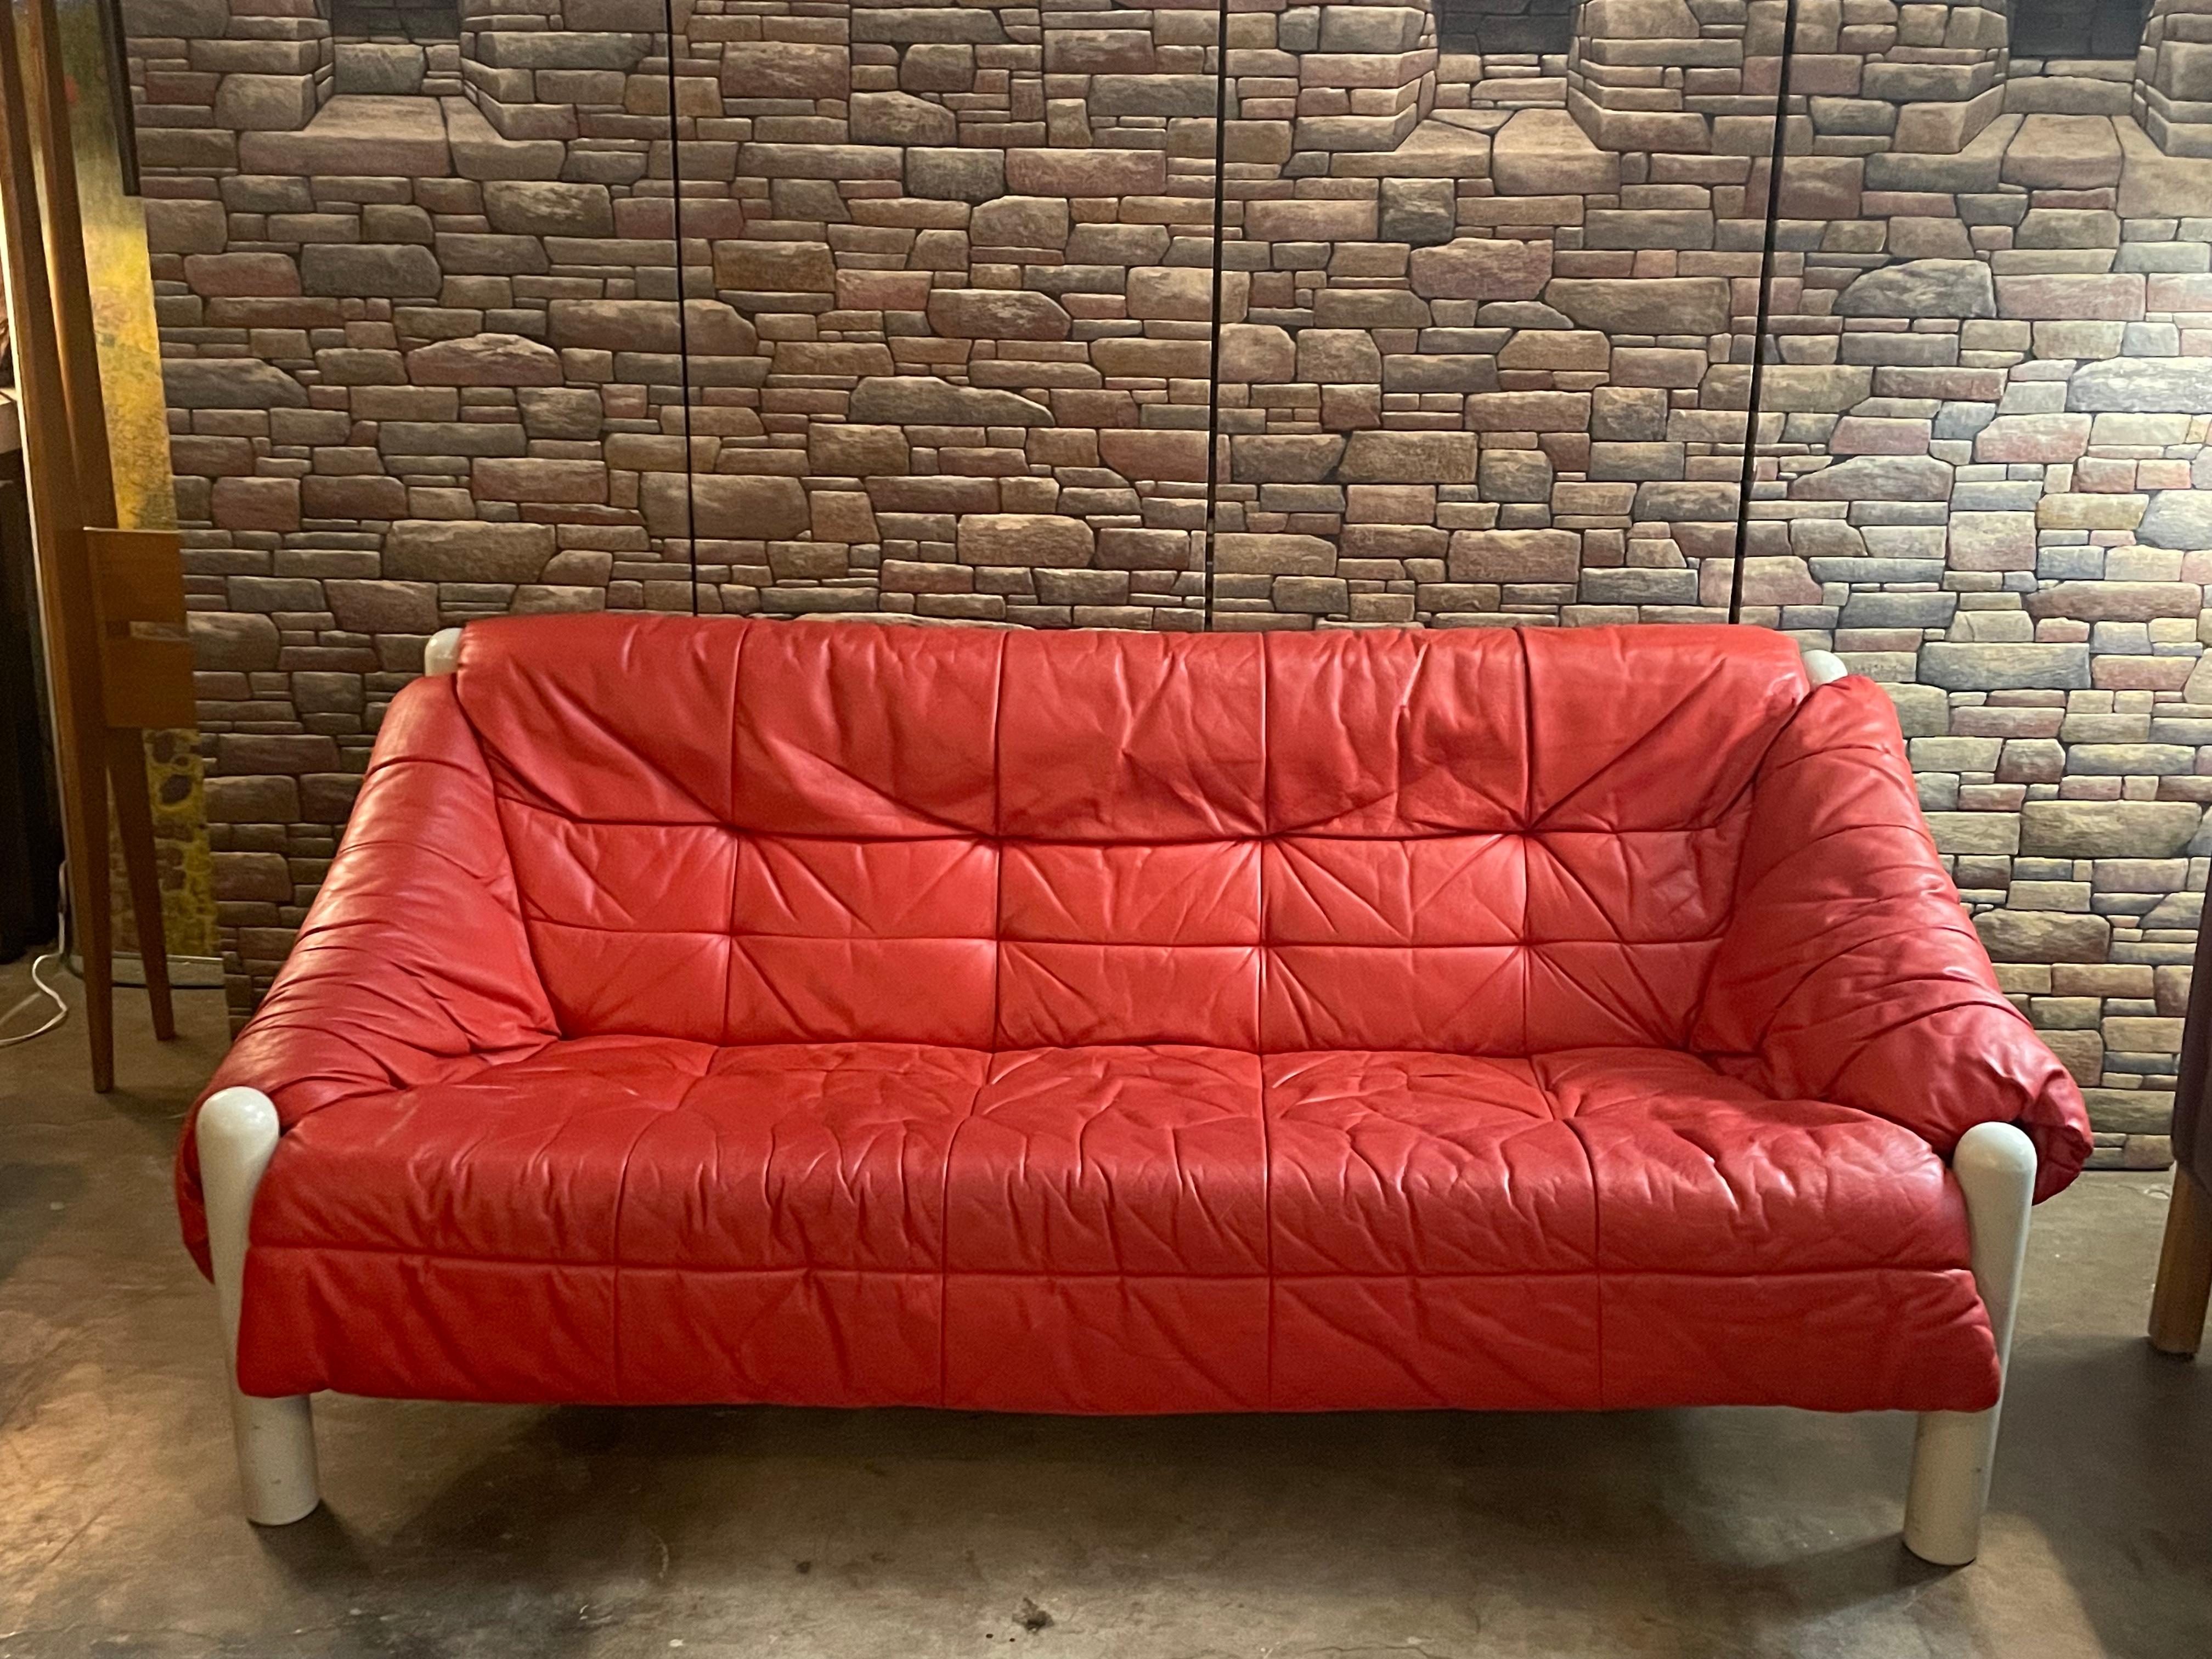 Dutch leather sling sofa with wooden legs painted white, circa 1970s and in good overall condition. 
Dimensions: 67